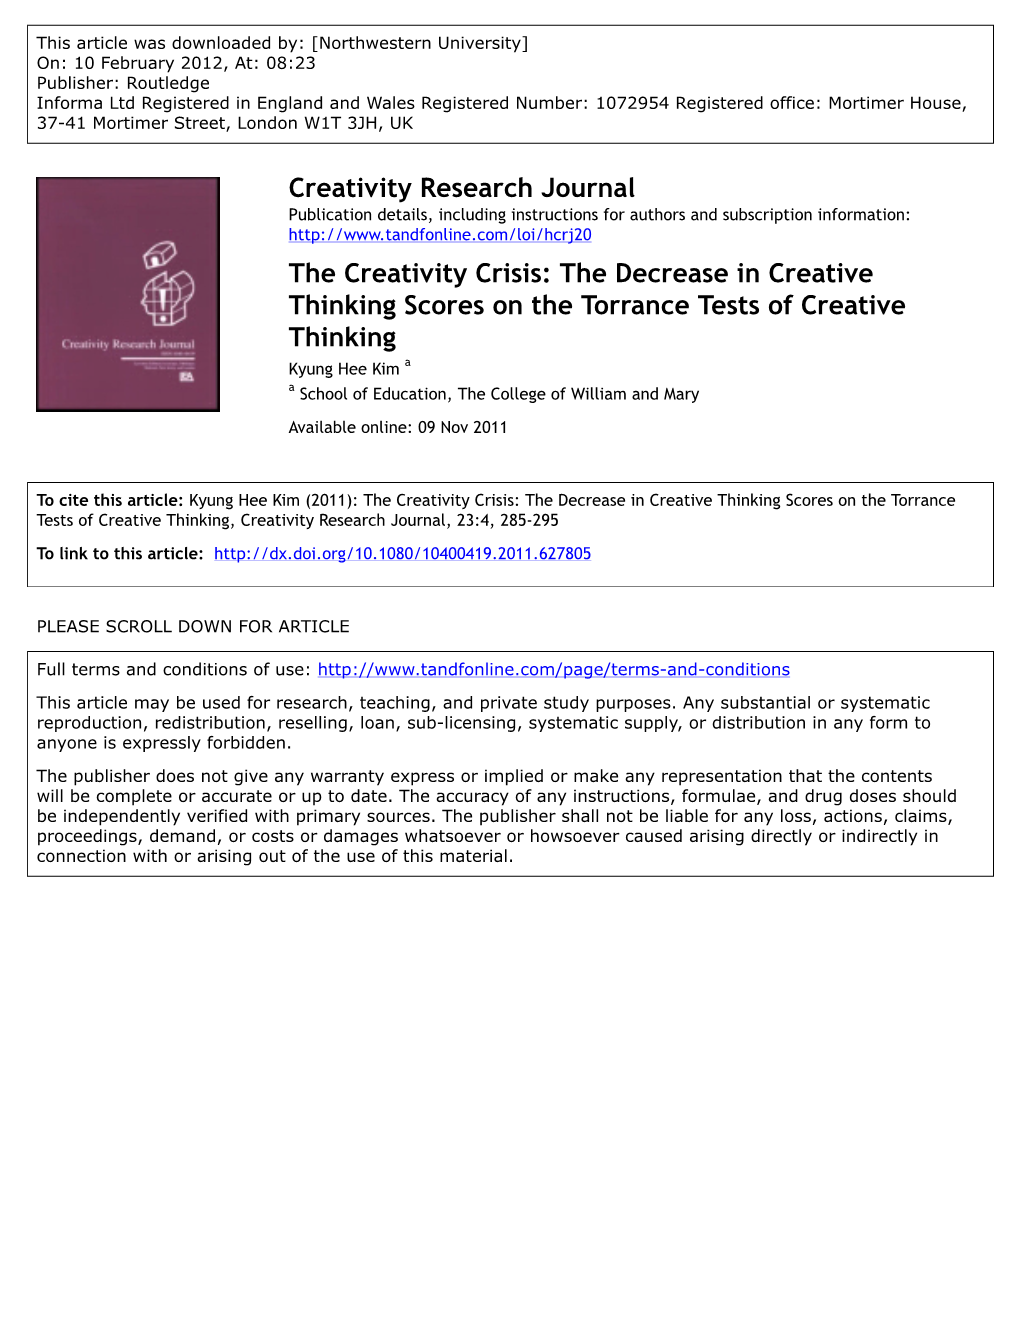 Creativity Research Journal the Creativity Crisis: the Decrease In